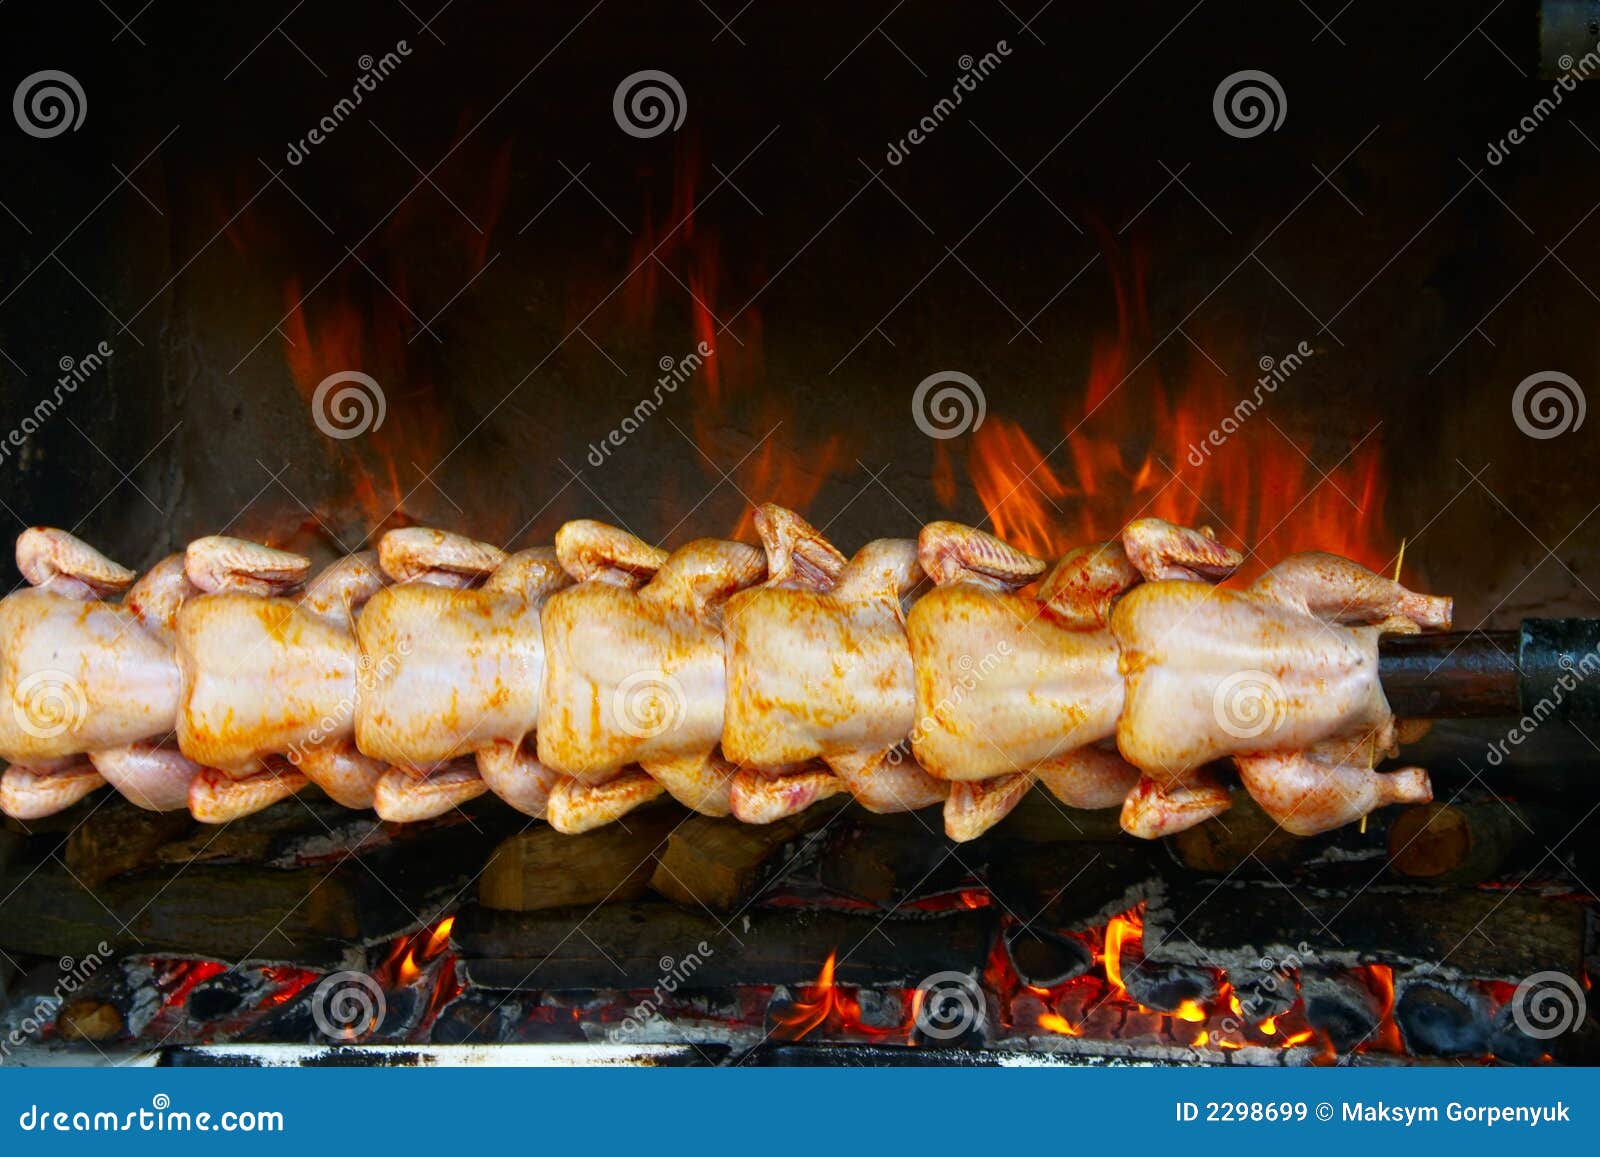 broiling chicken on spit